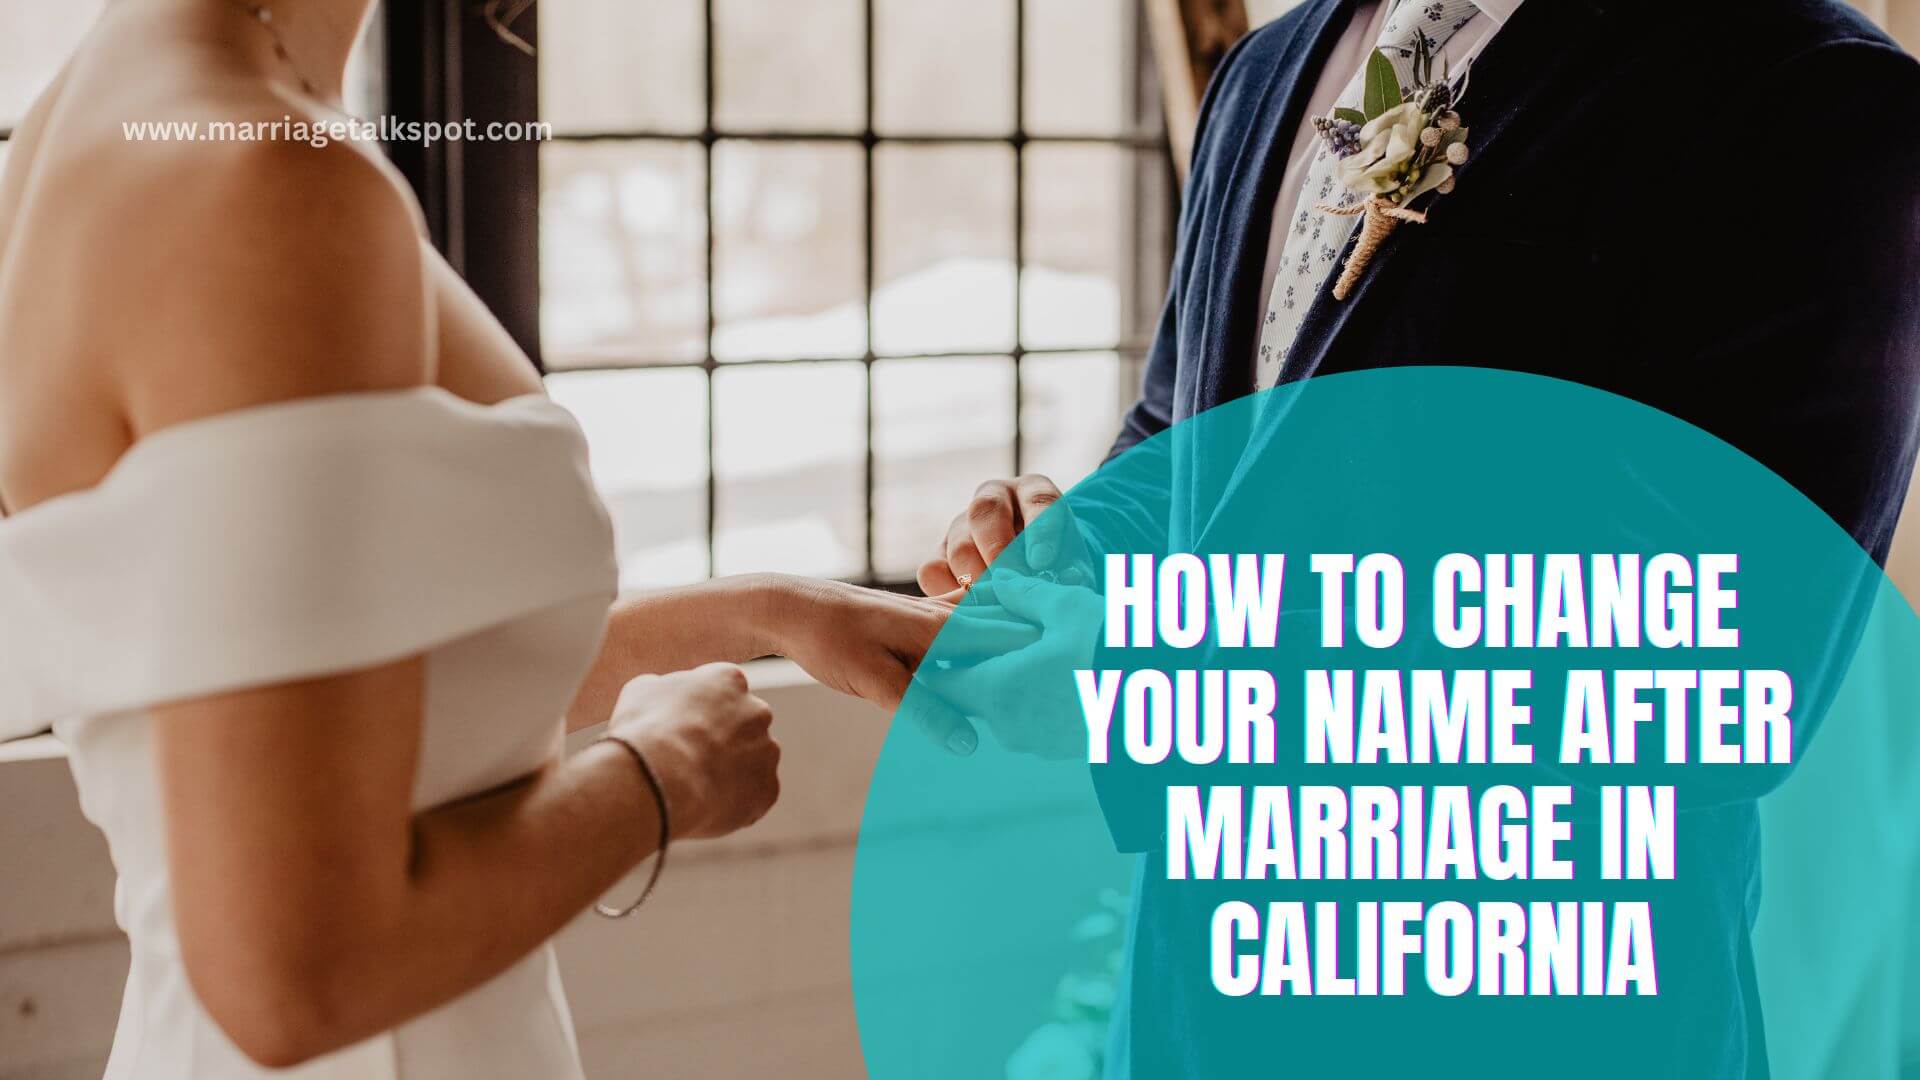 HOW TO CHANGE YOUR NAME AFTER MARRIAGE IN CALIFORNIA